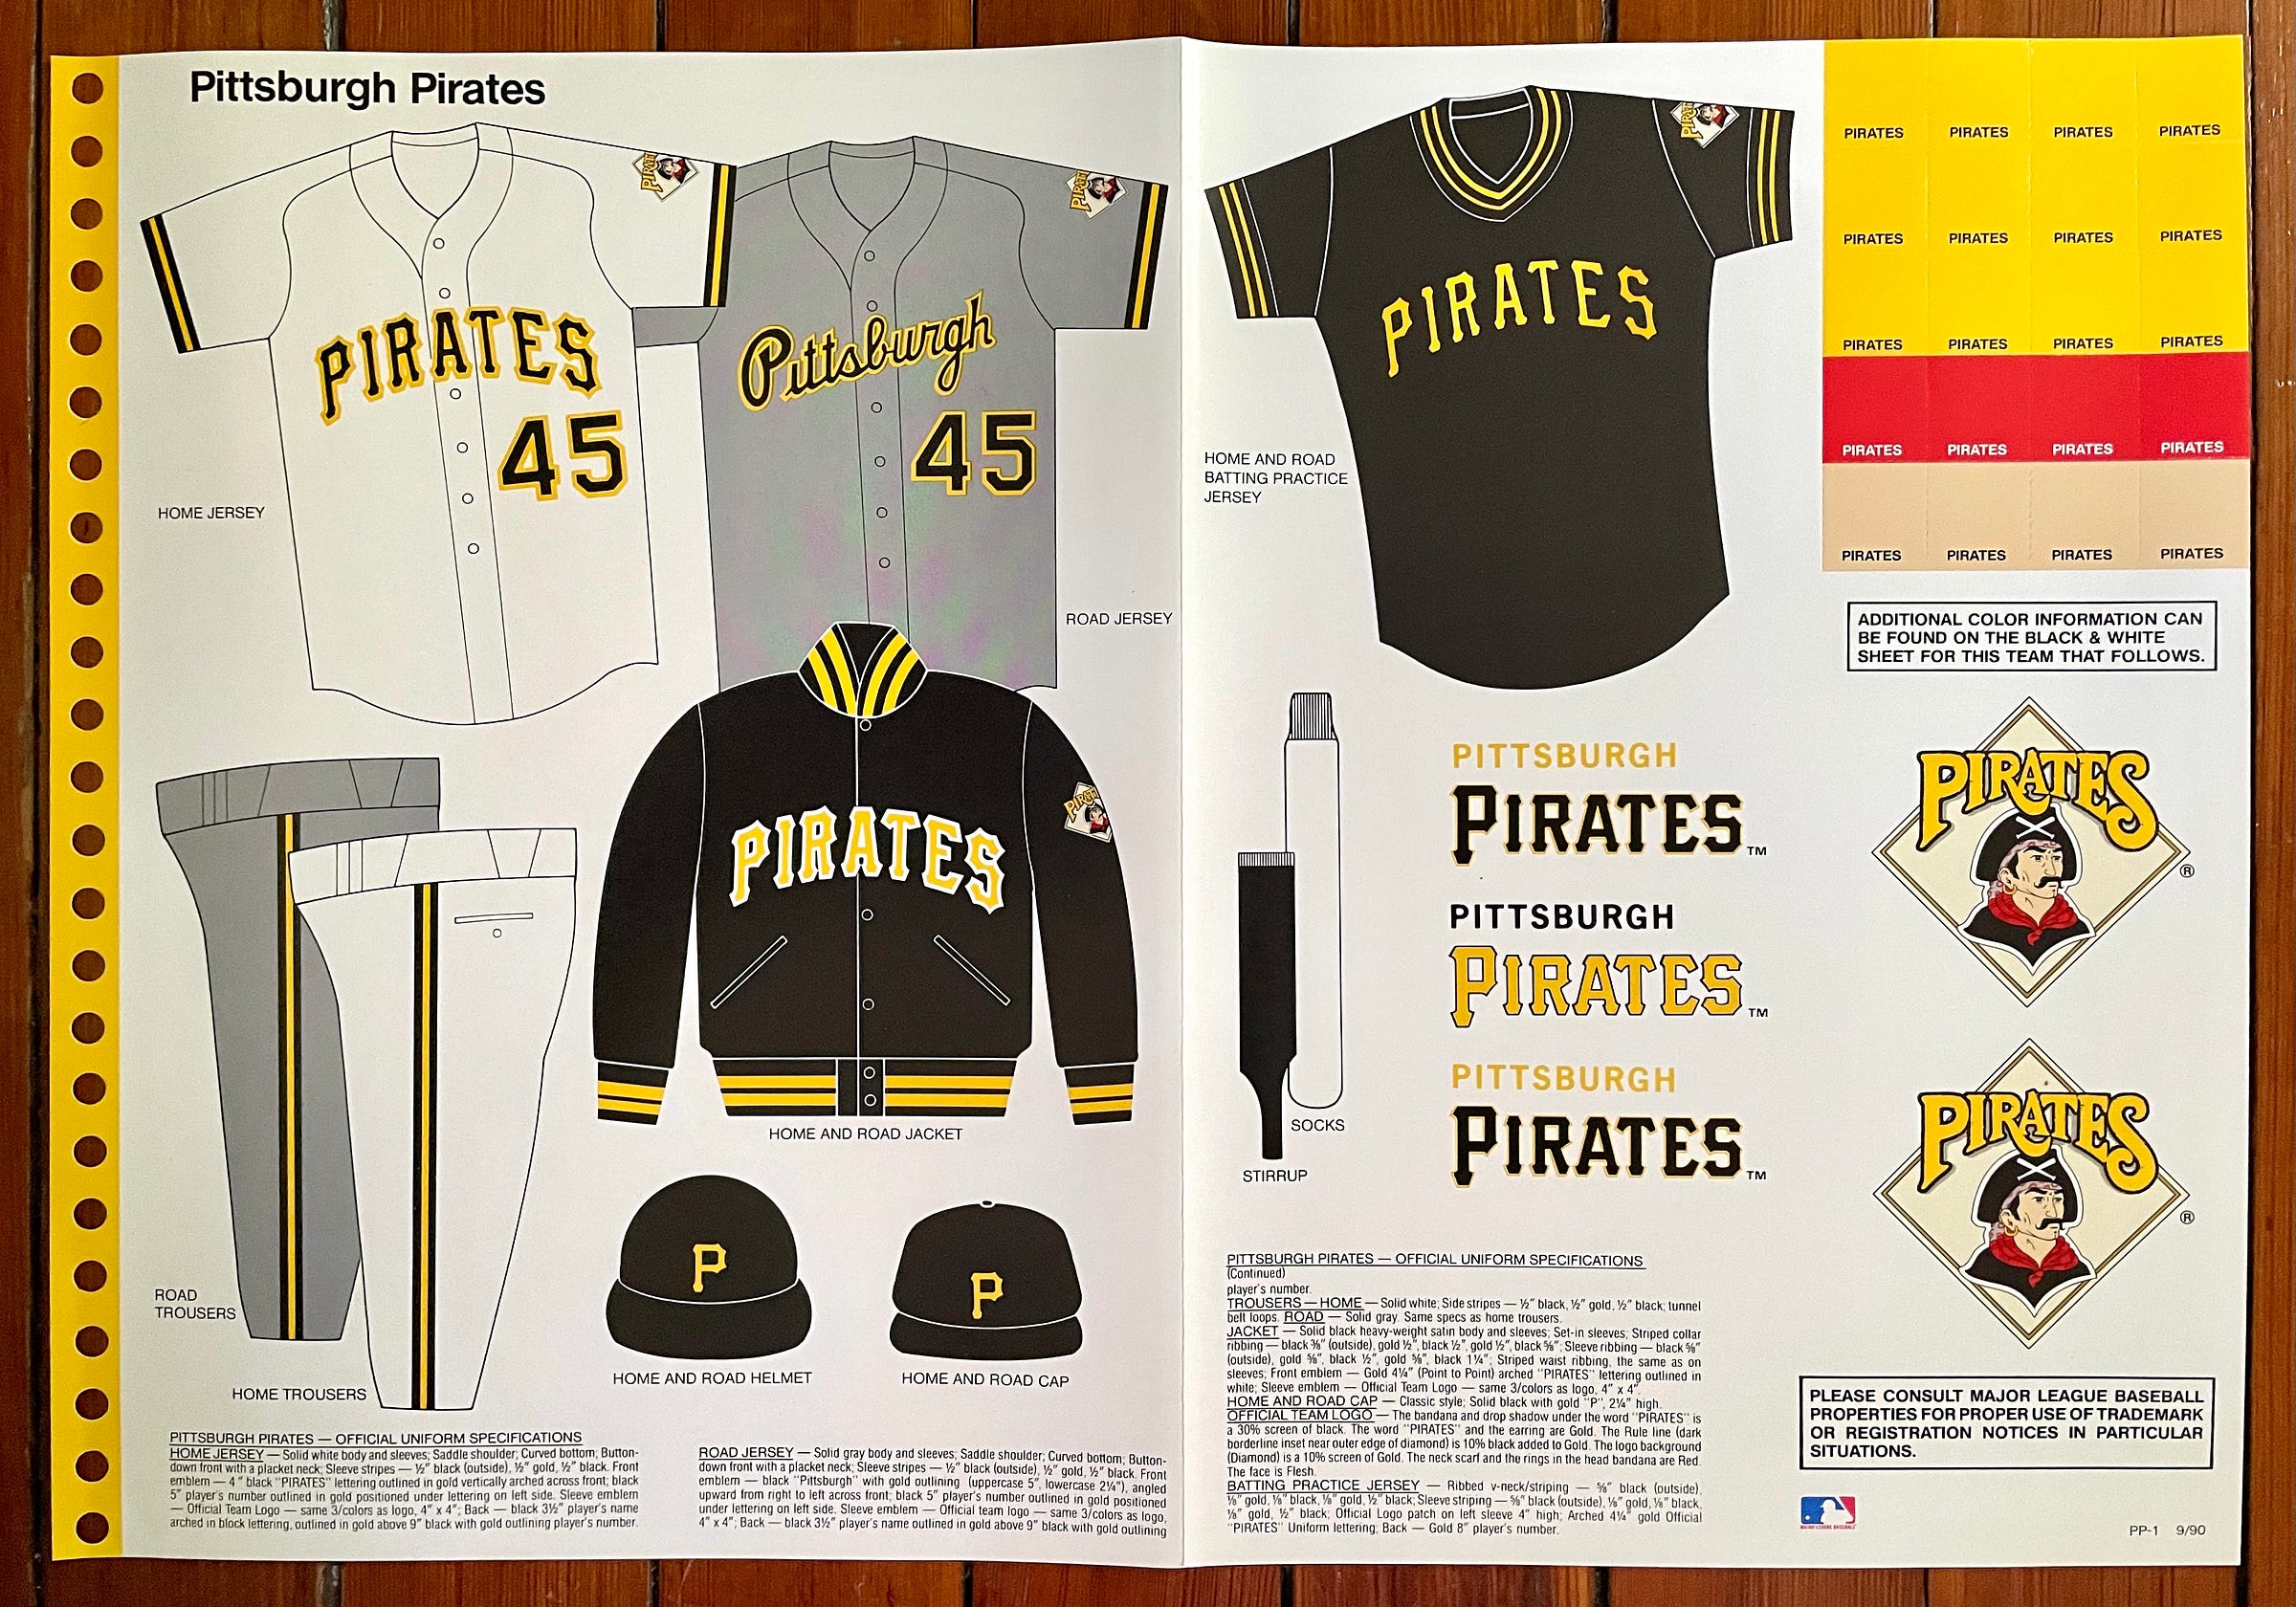 A closer look at the uniforms and logos of the 90s